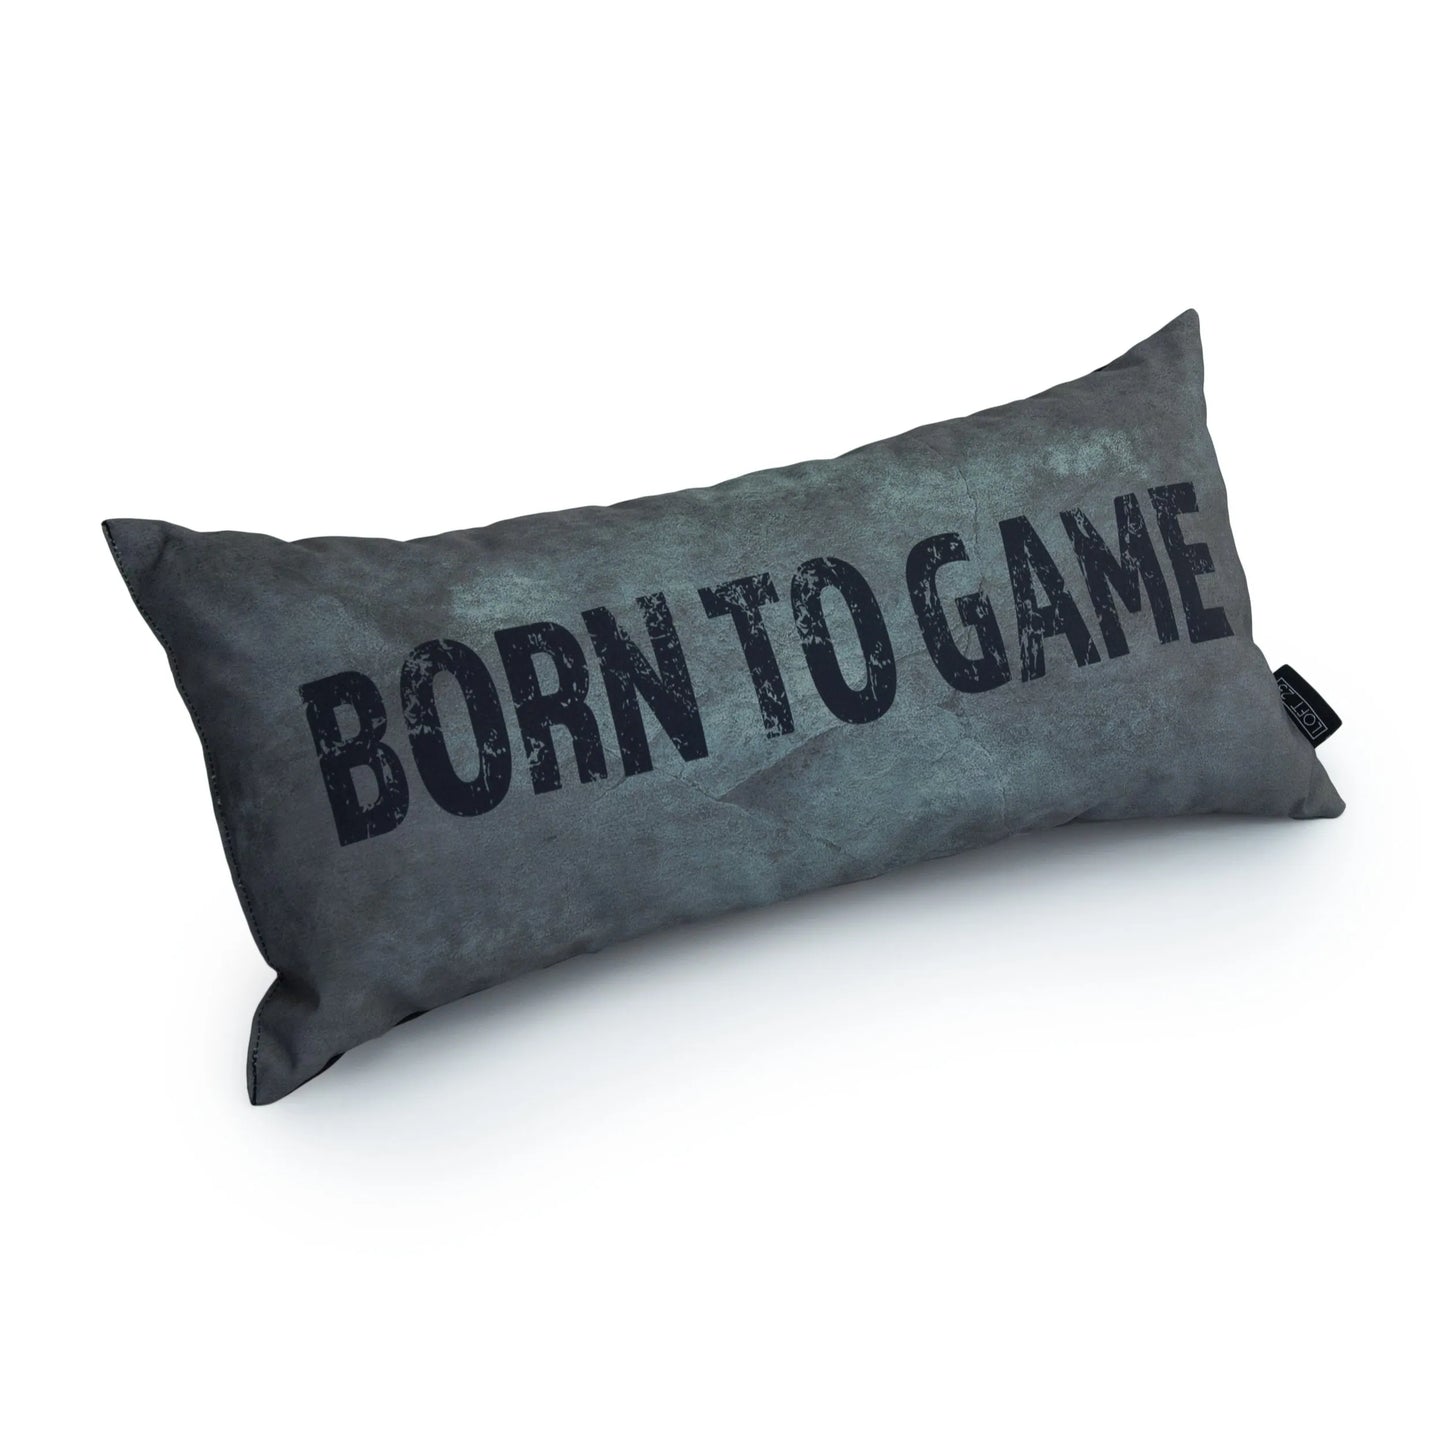 A Grey pillow with the text "BORN TO GAME" written on it in black letters